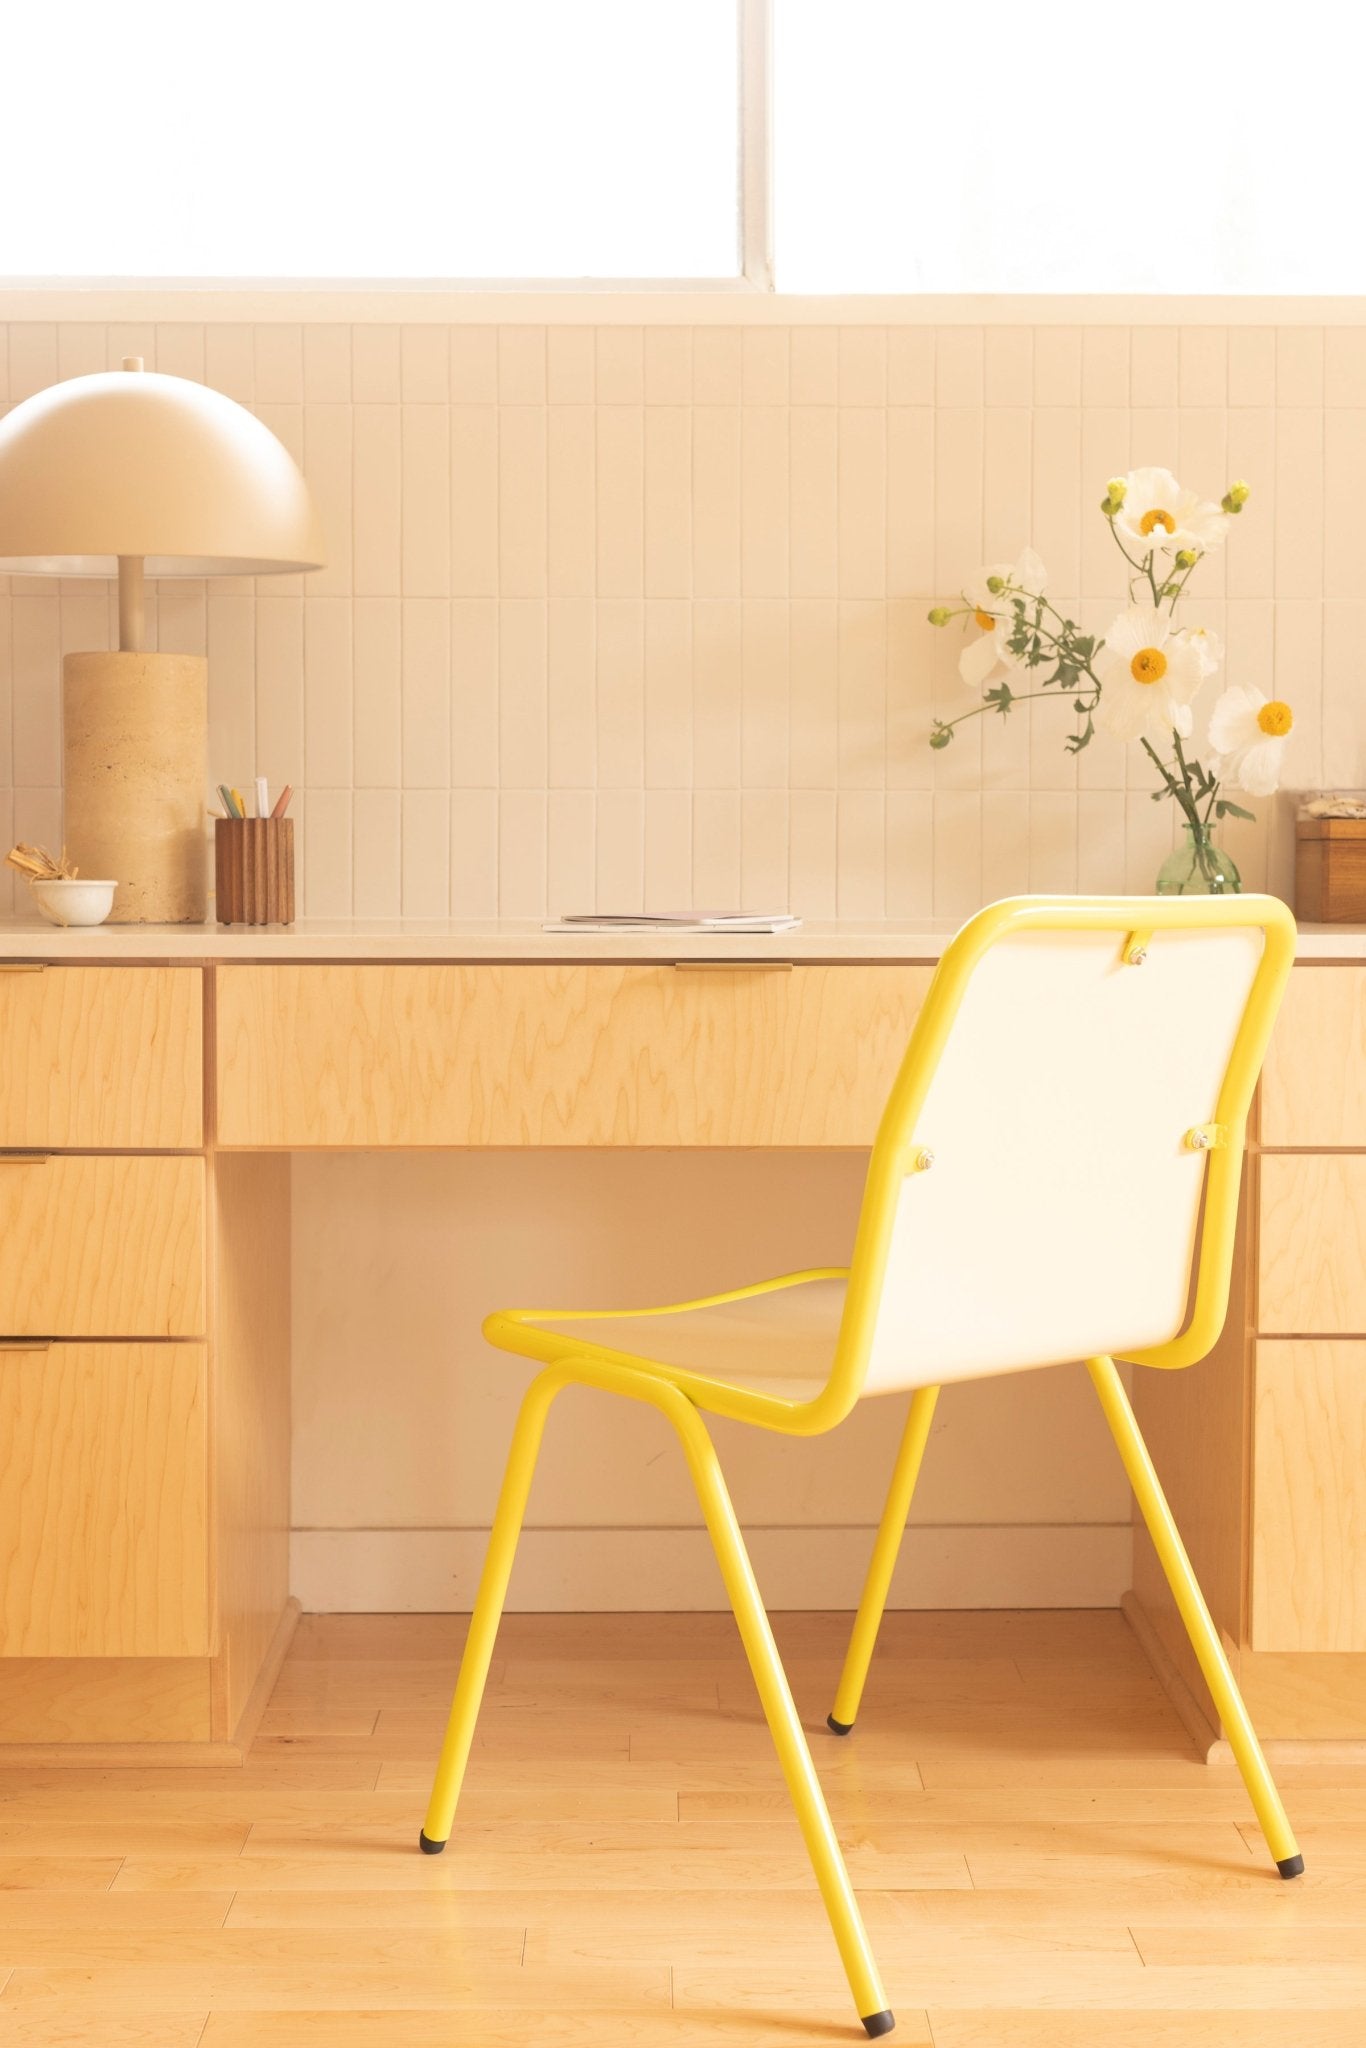 The Duo Chair Makes Work Look Good